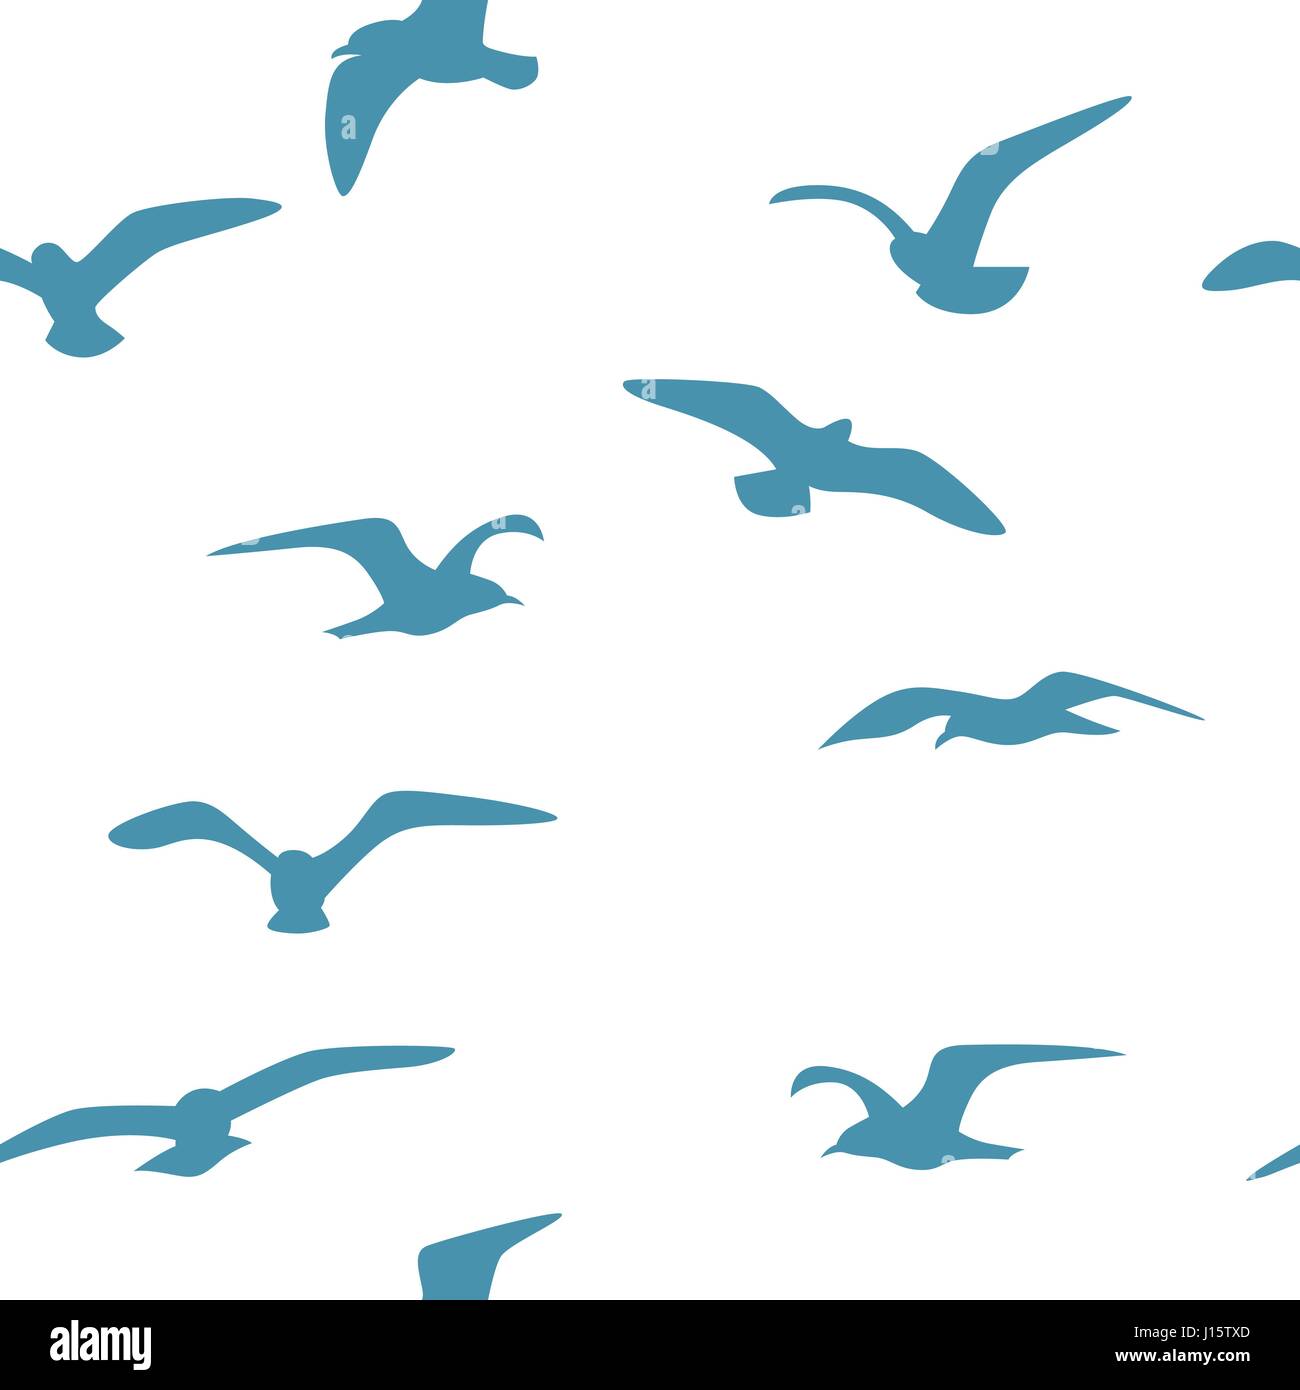 Seamless background with birds Stock Vector